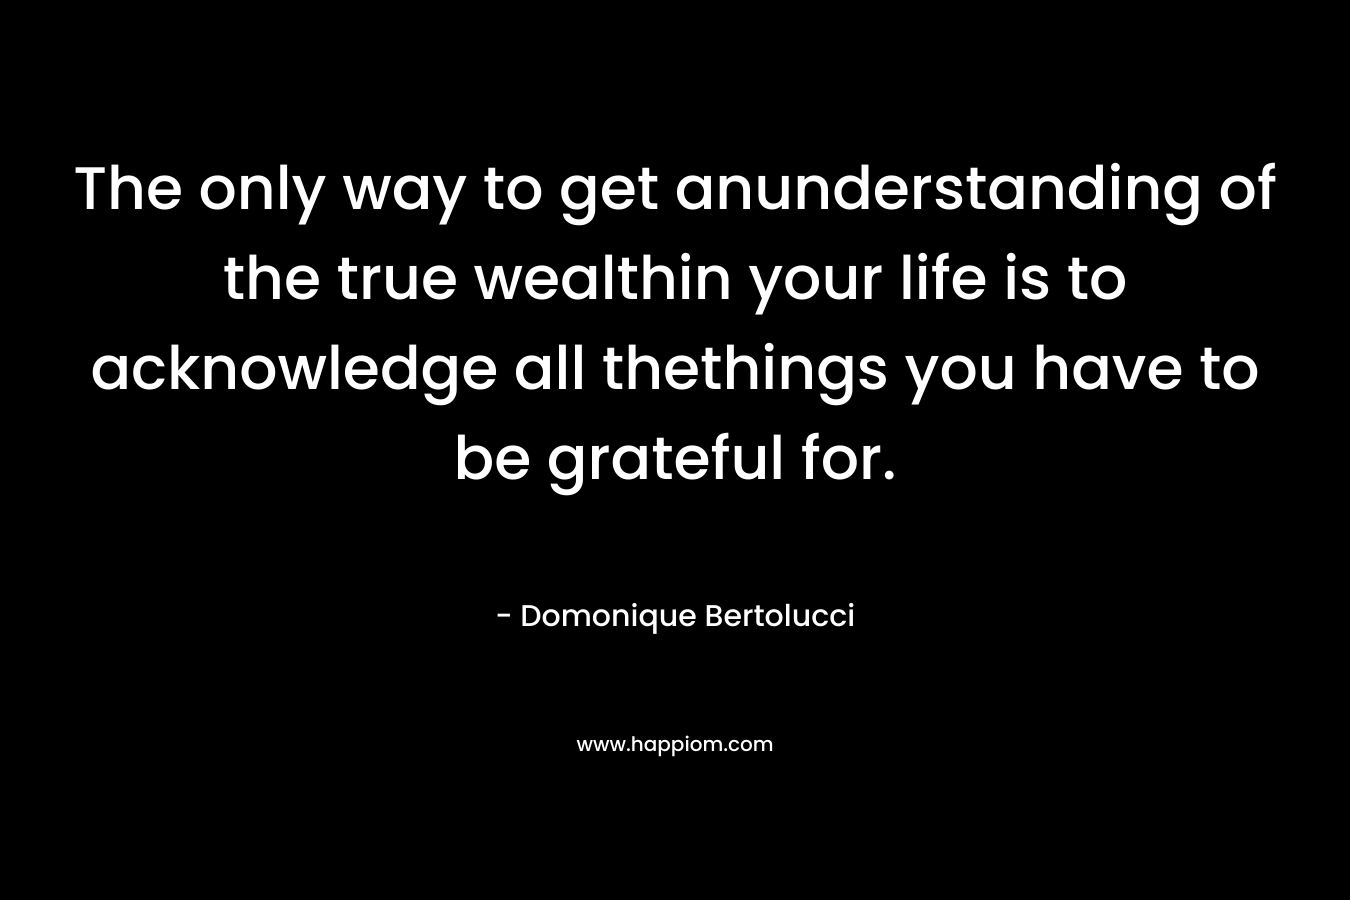 The only way to get anunderstanding of the true wealthin your life is to acknowledge all thethings you have to be grateful for.